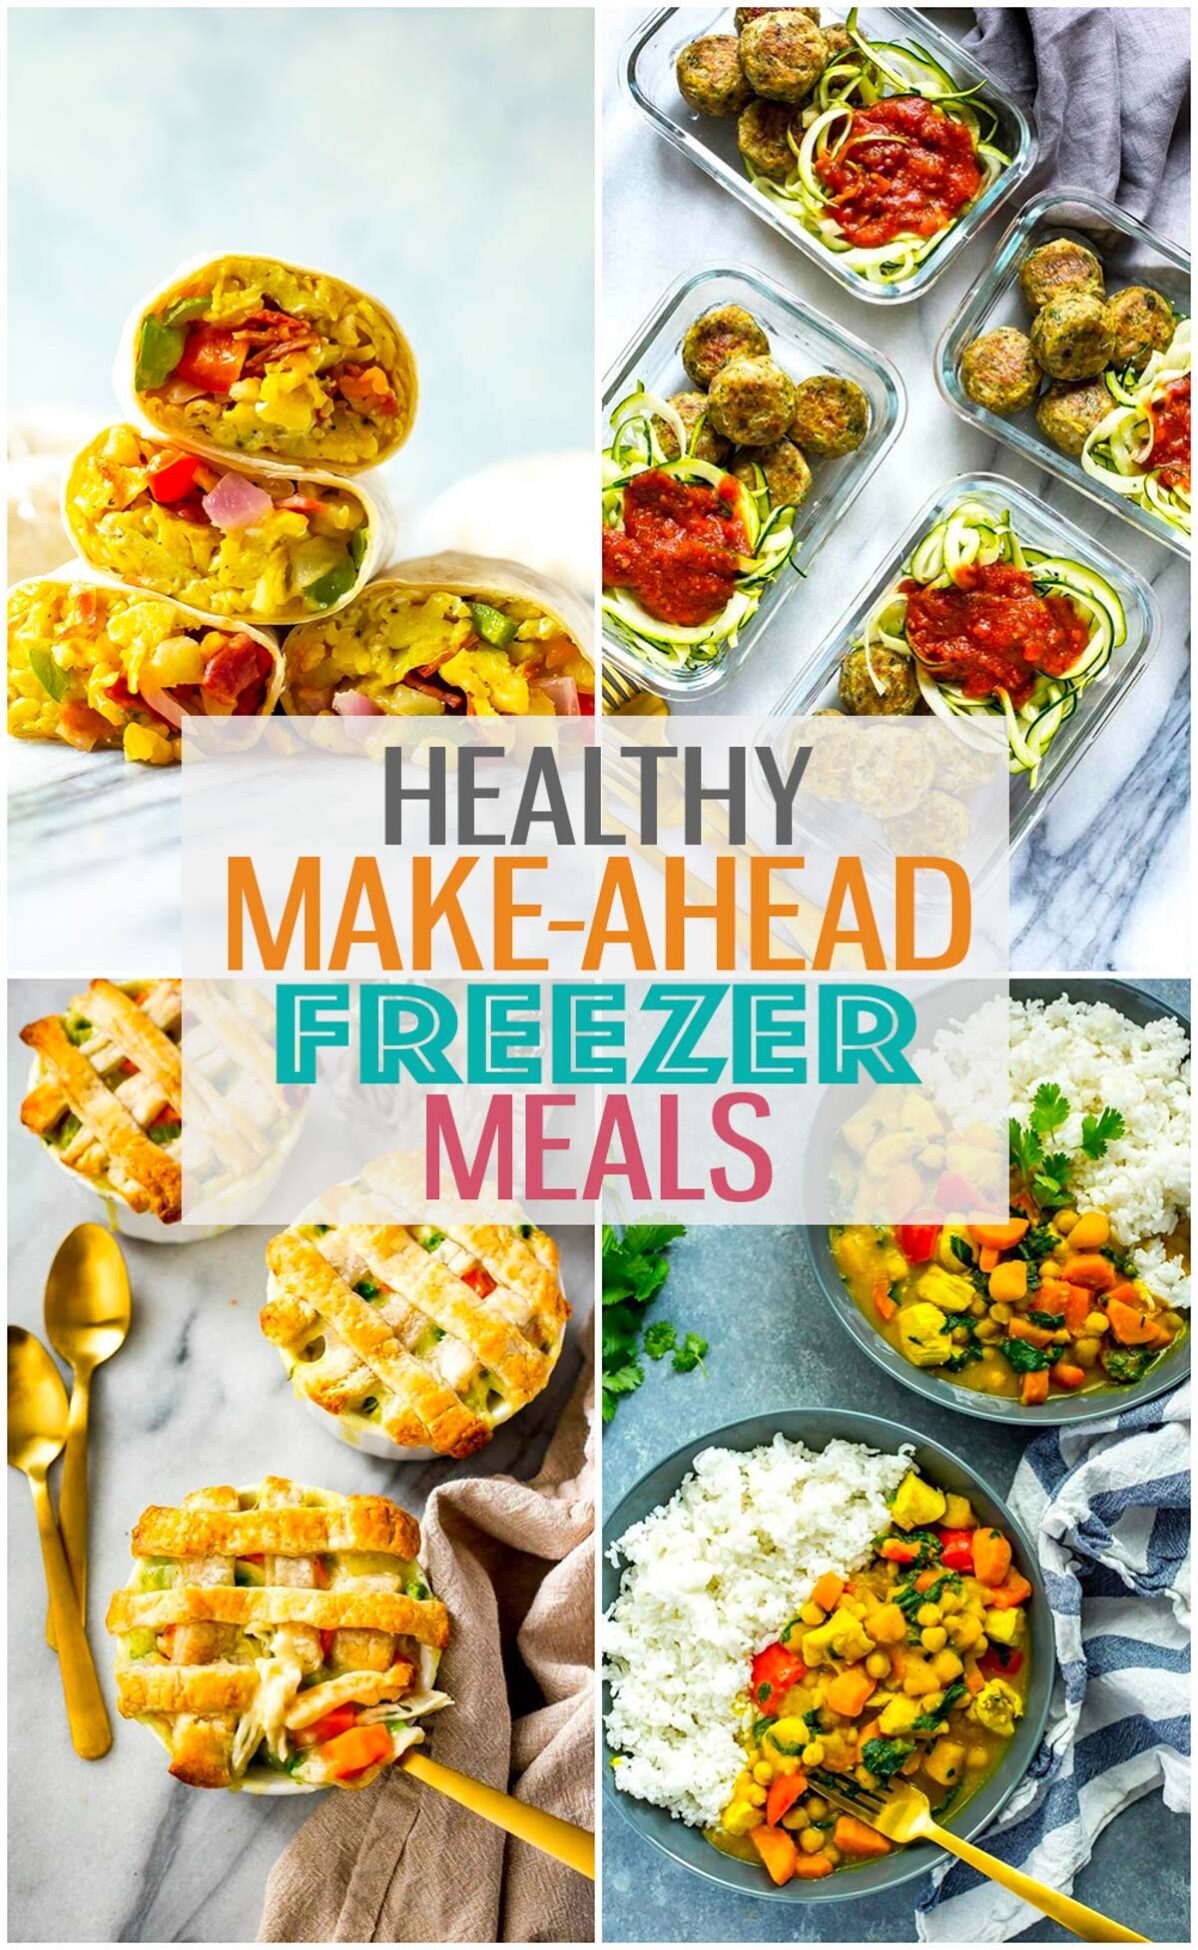 A collage of four different freezer meals with the text "Healthy Make-Ahead Freezer Meals" layered over top.